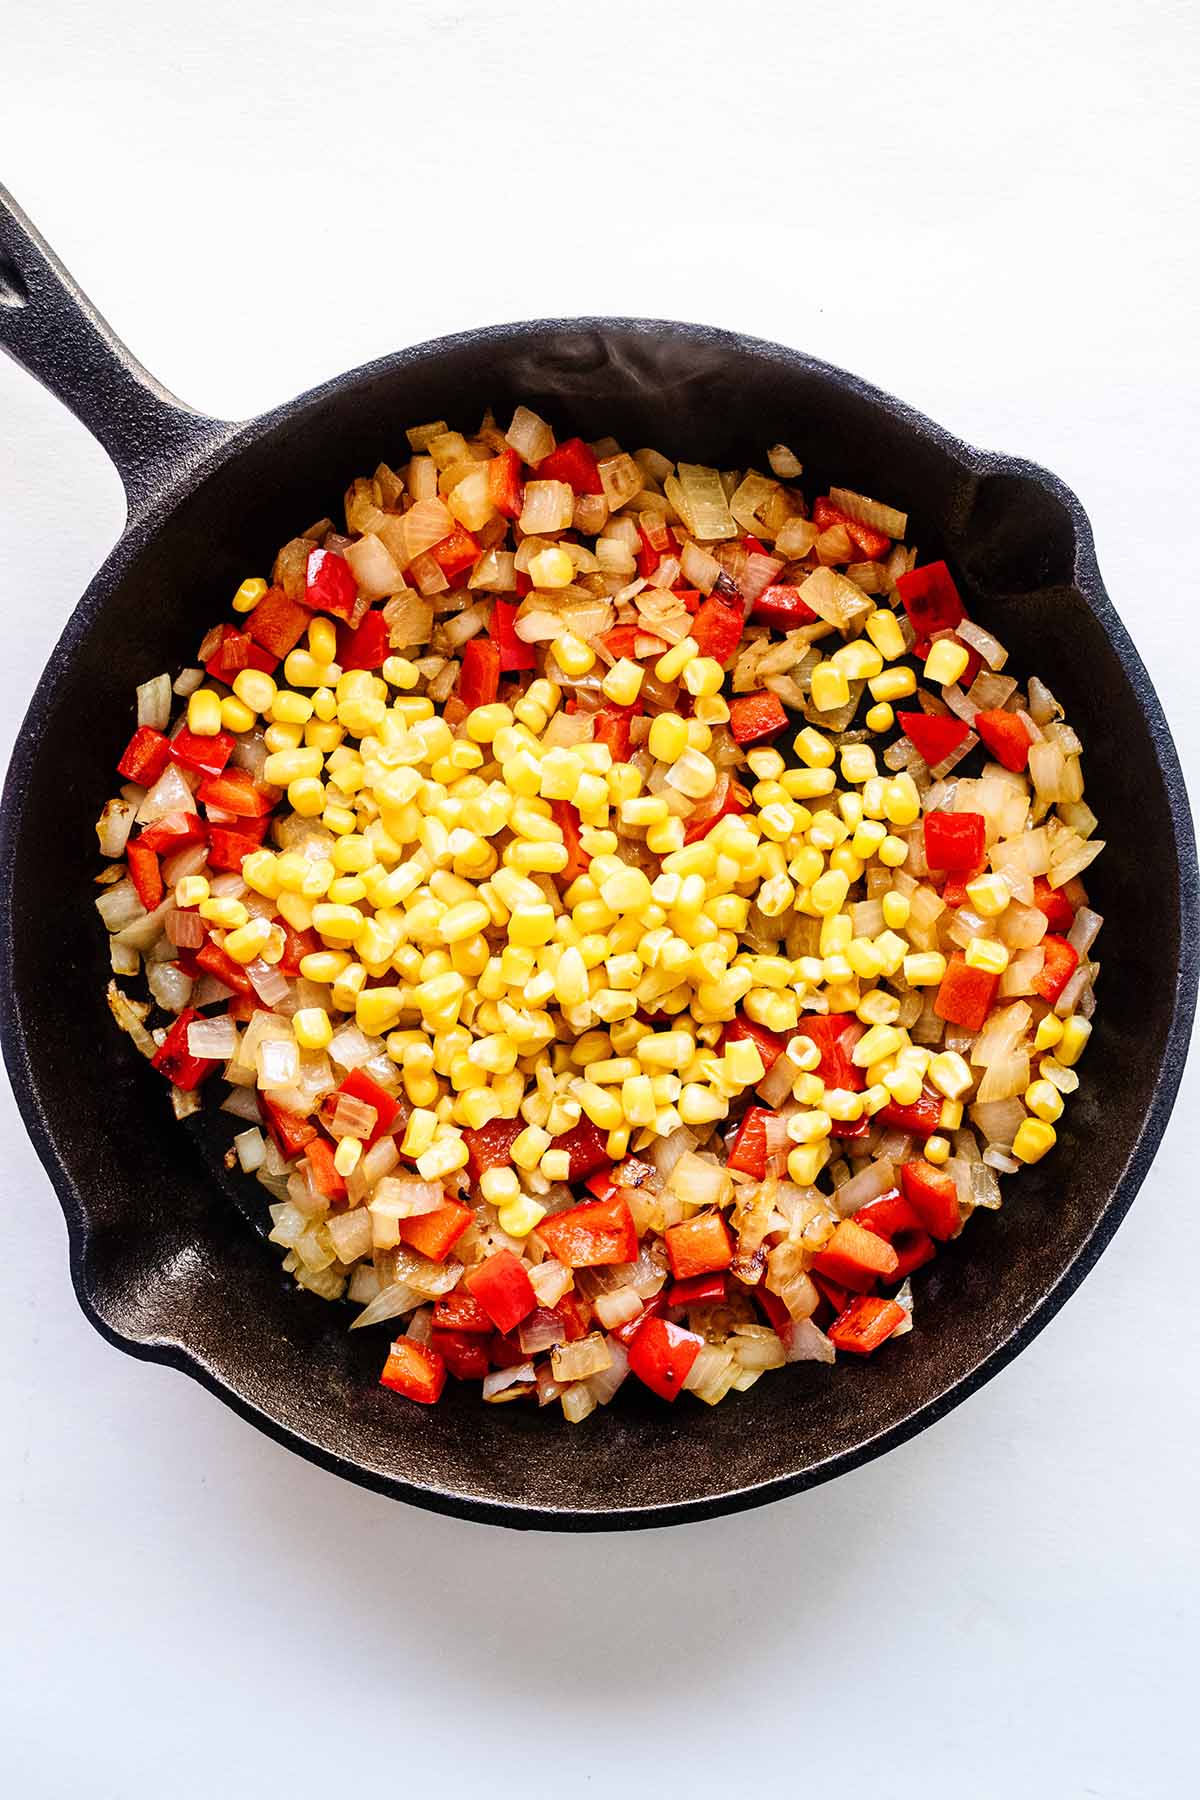 Chopped onion, red bell pepper and corn in a cast iron skillet.